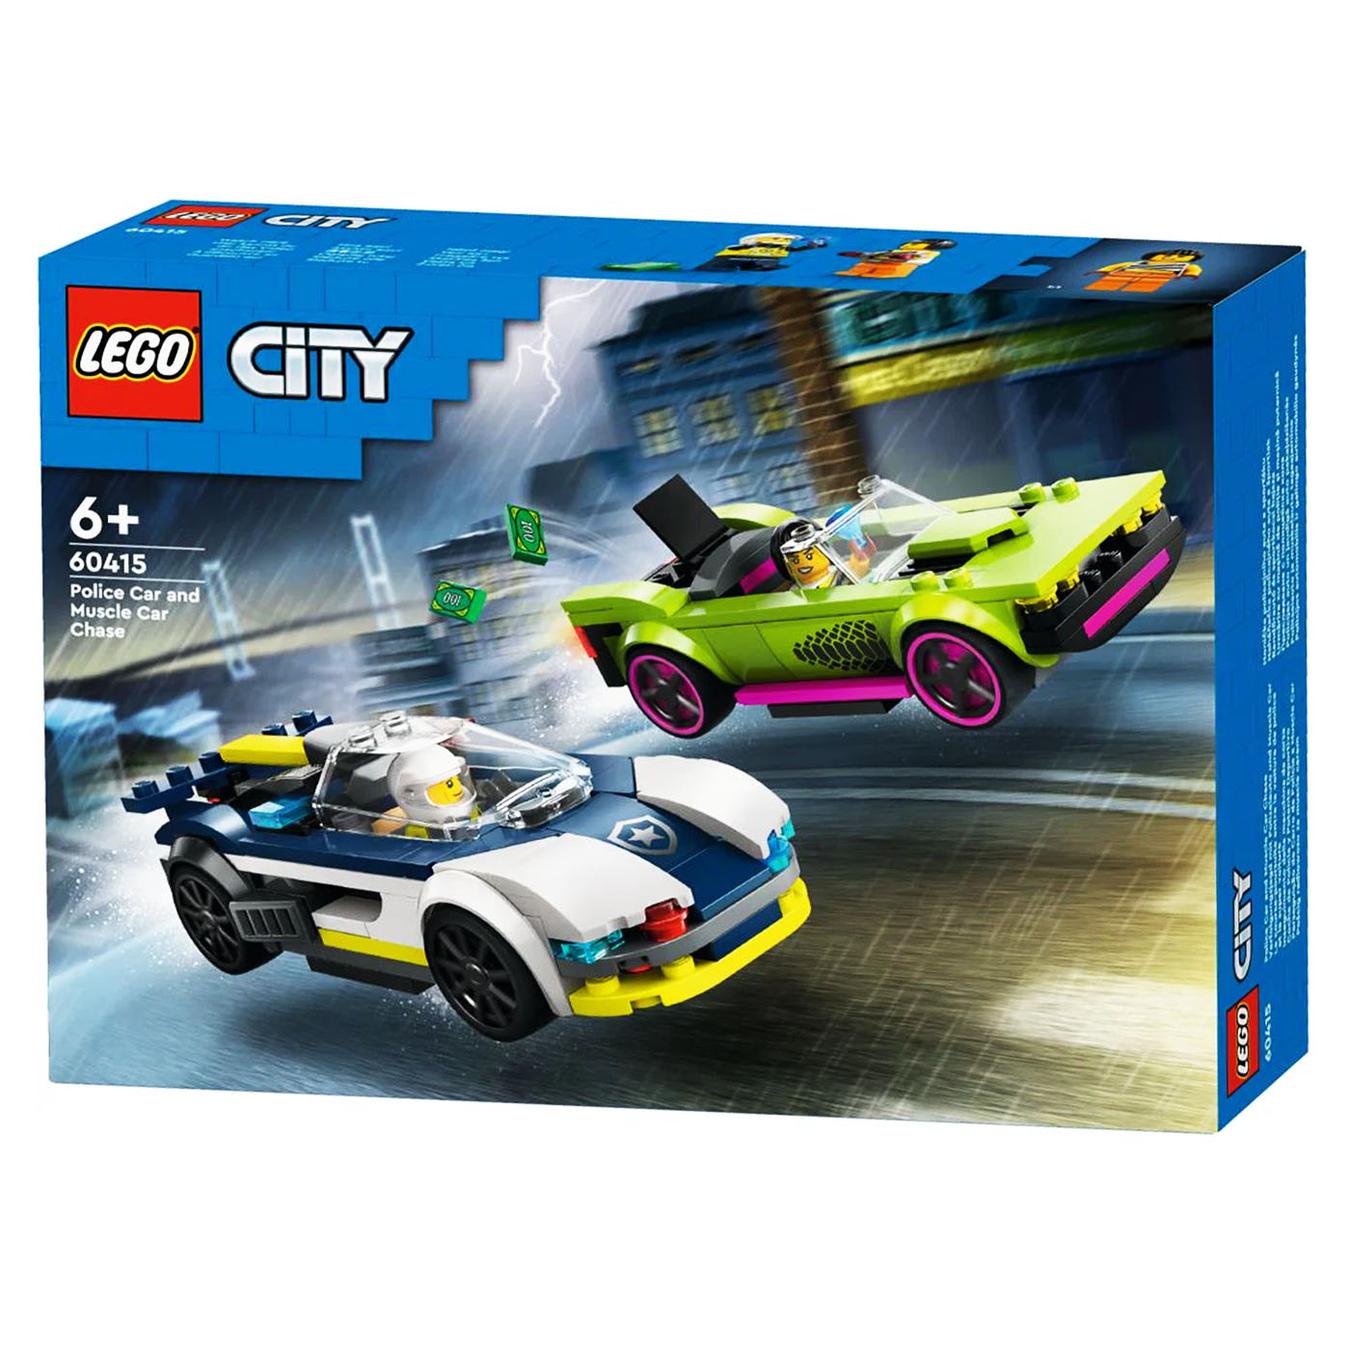 Constructor LEGO City 60415 Pursuit of a muscle car with a police car